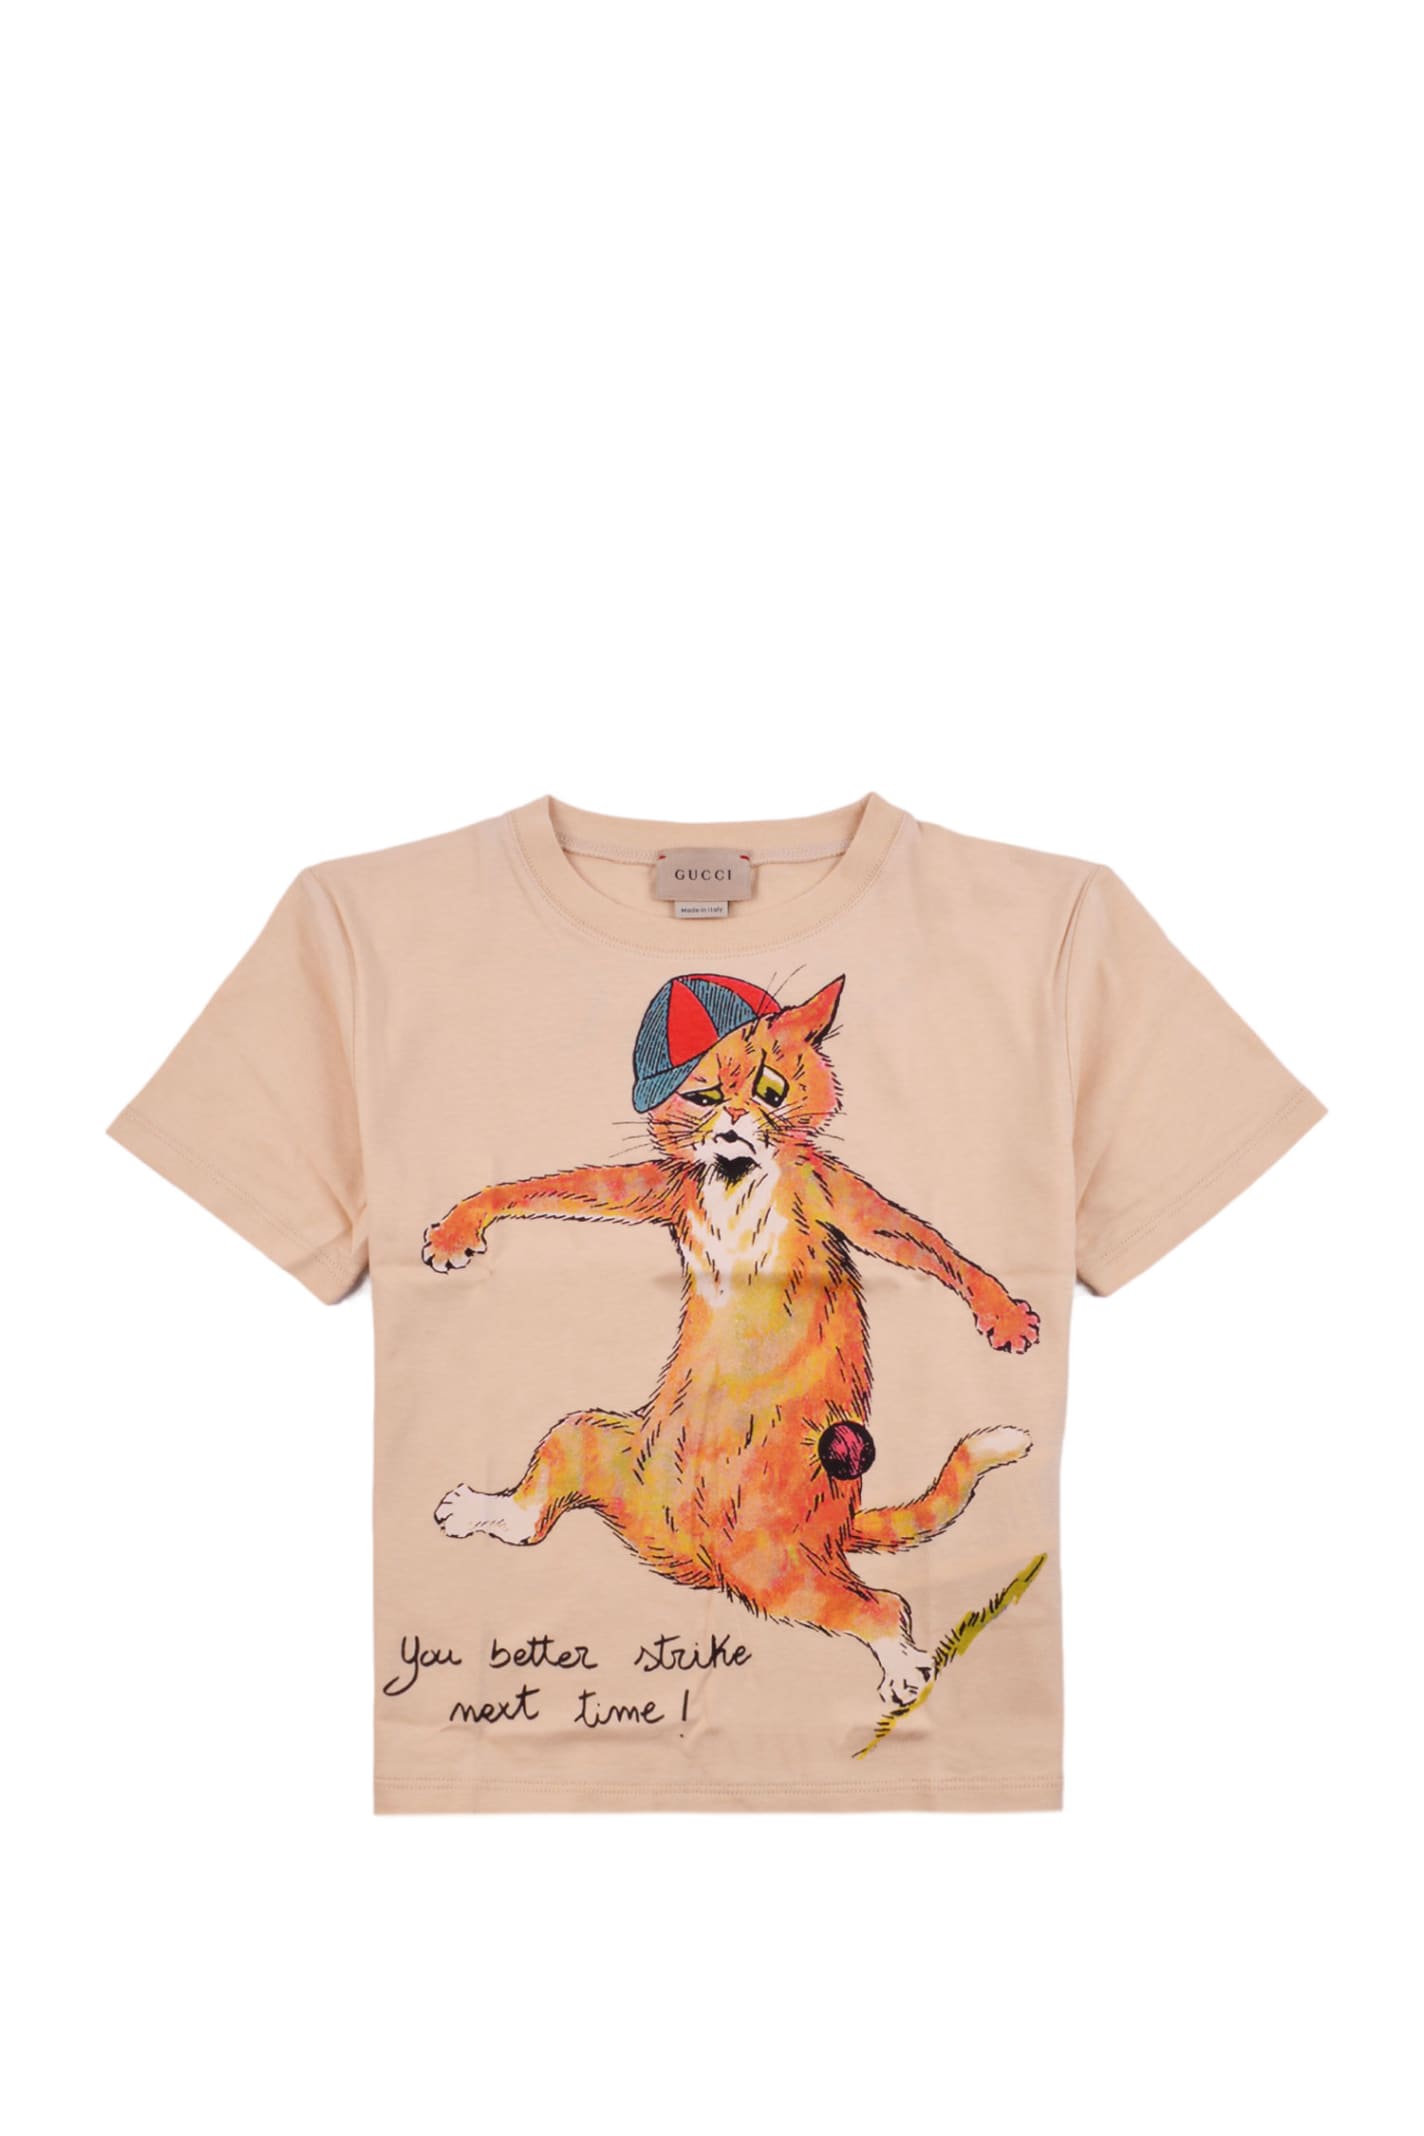 GUCCI COTTON T-SHIRT WITH PRINT